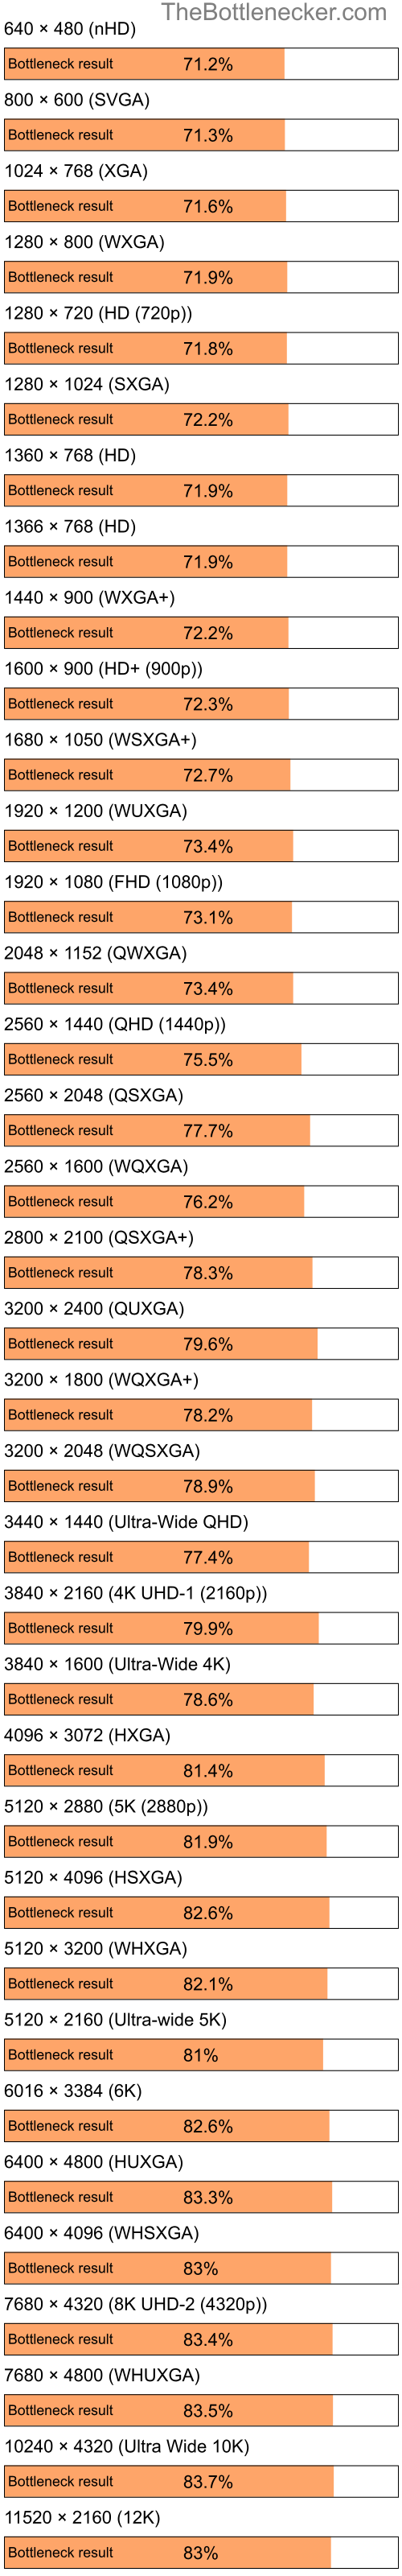 Bottleneck results by resolution for Intel Atom N270 and AMD Mobility Radeon X300 in Processor Intense Tasks